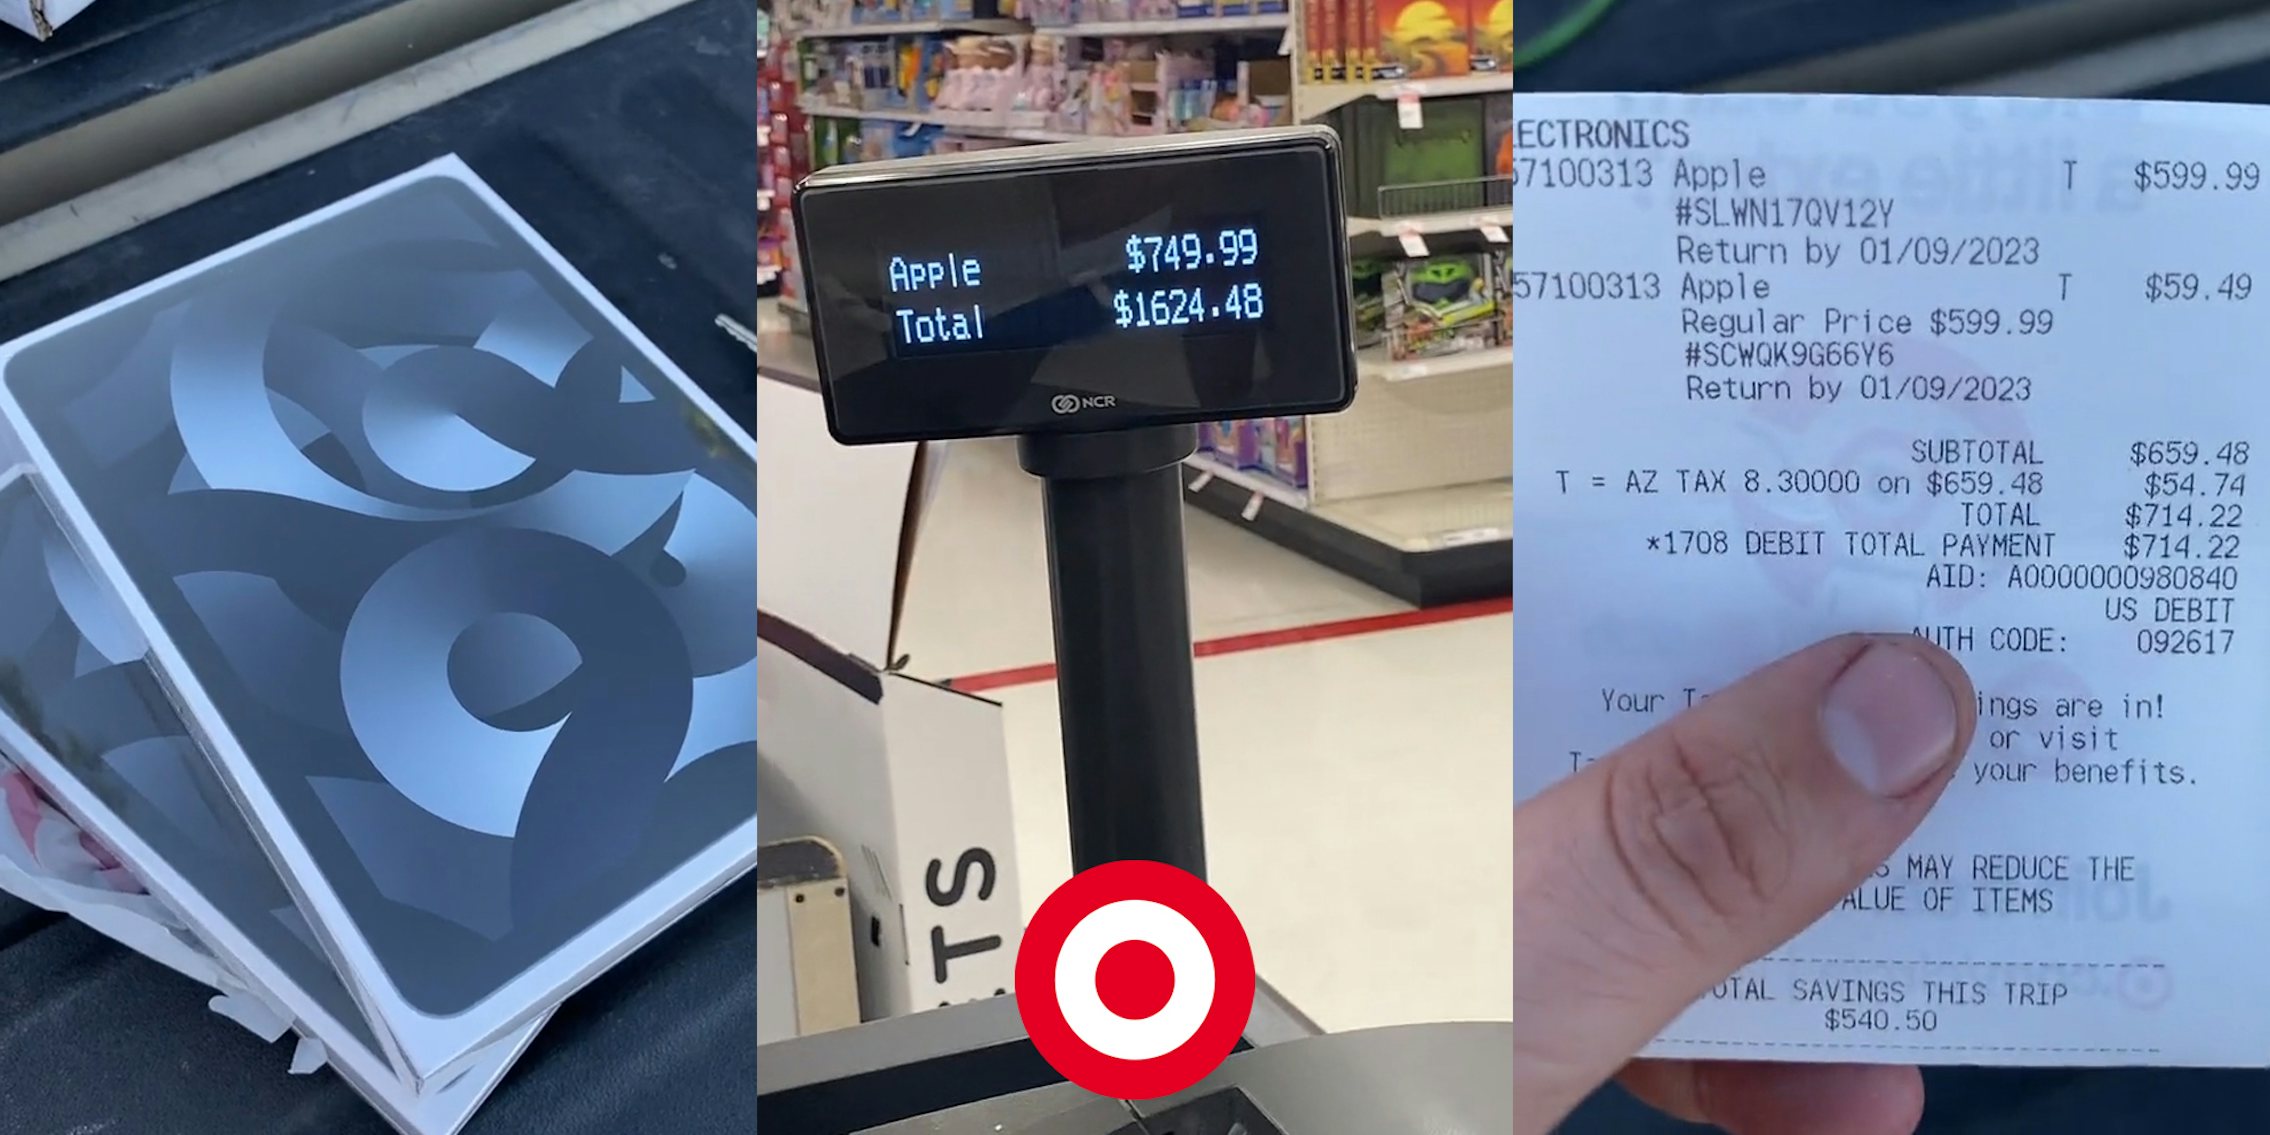 Apple iPad's (l) Target checkout total 'Apple $749.99 Total $1624.48' with Target logo centered at bottom (c) person holding Target receipt '$599.00 $59.49 Debit Total Payment $714.22' (r)